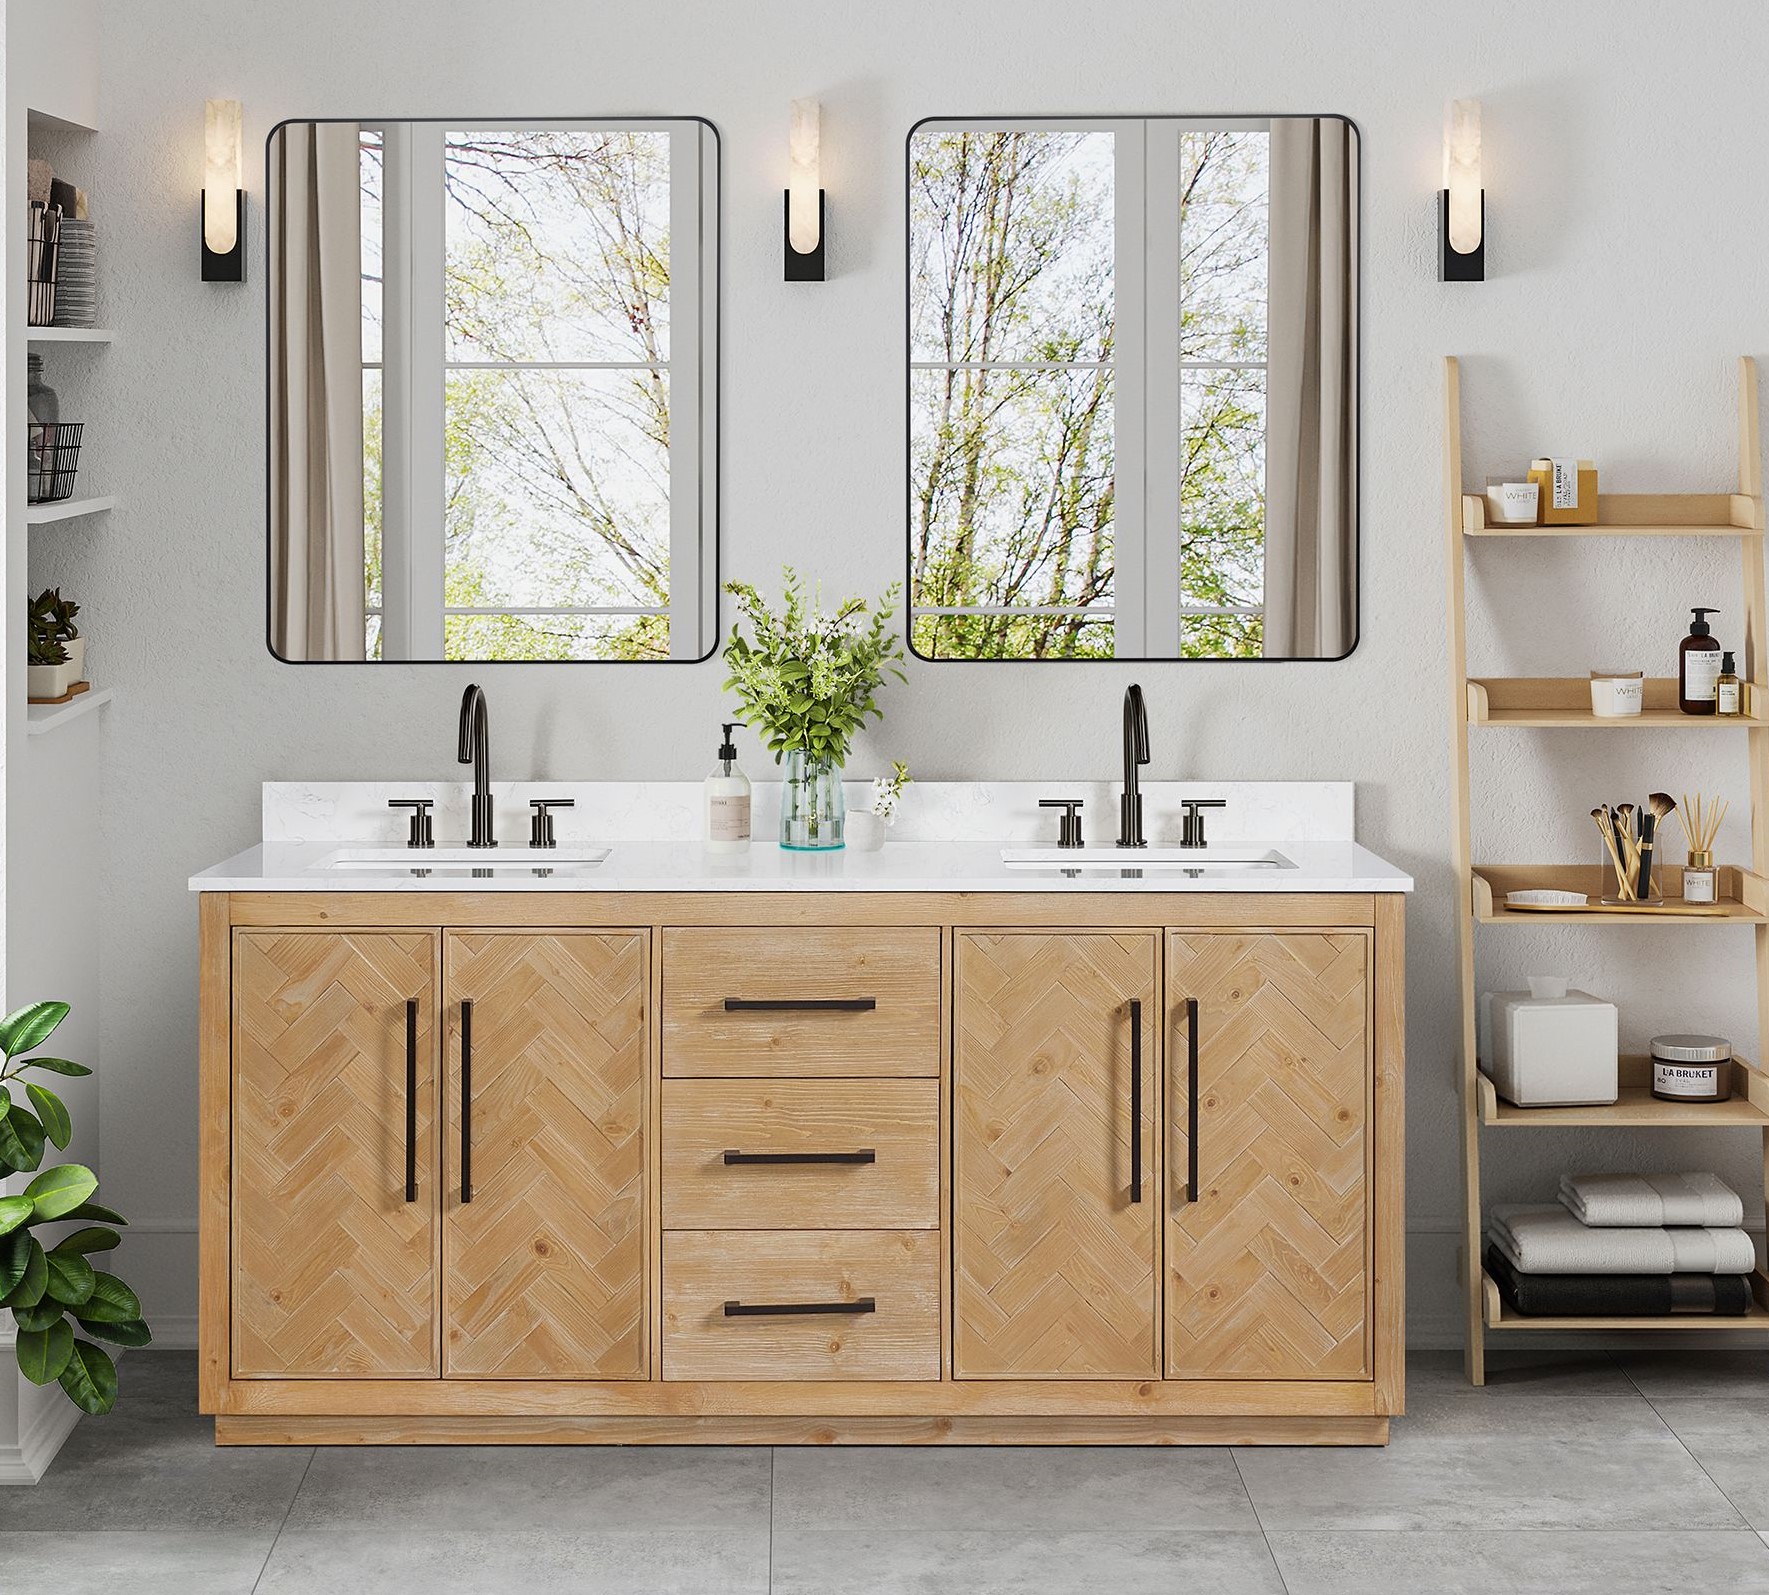 Issac Edwards 72" Double Bathroom Vanity in Weathered Fir with Grain White Engineered Stone Countertop with Mirror